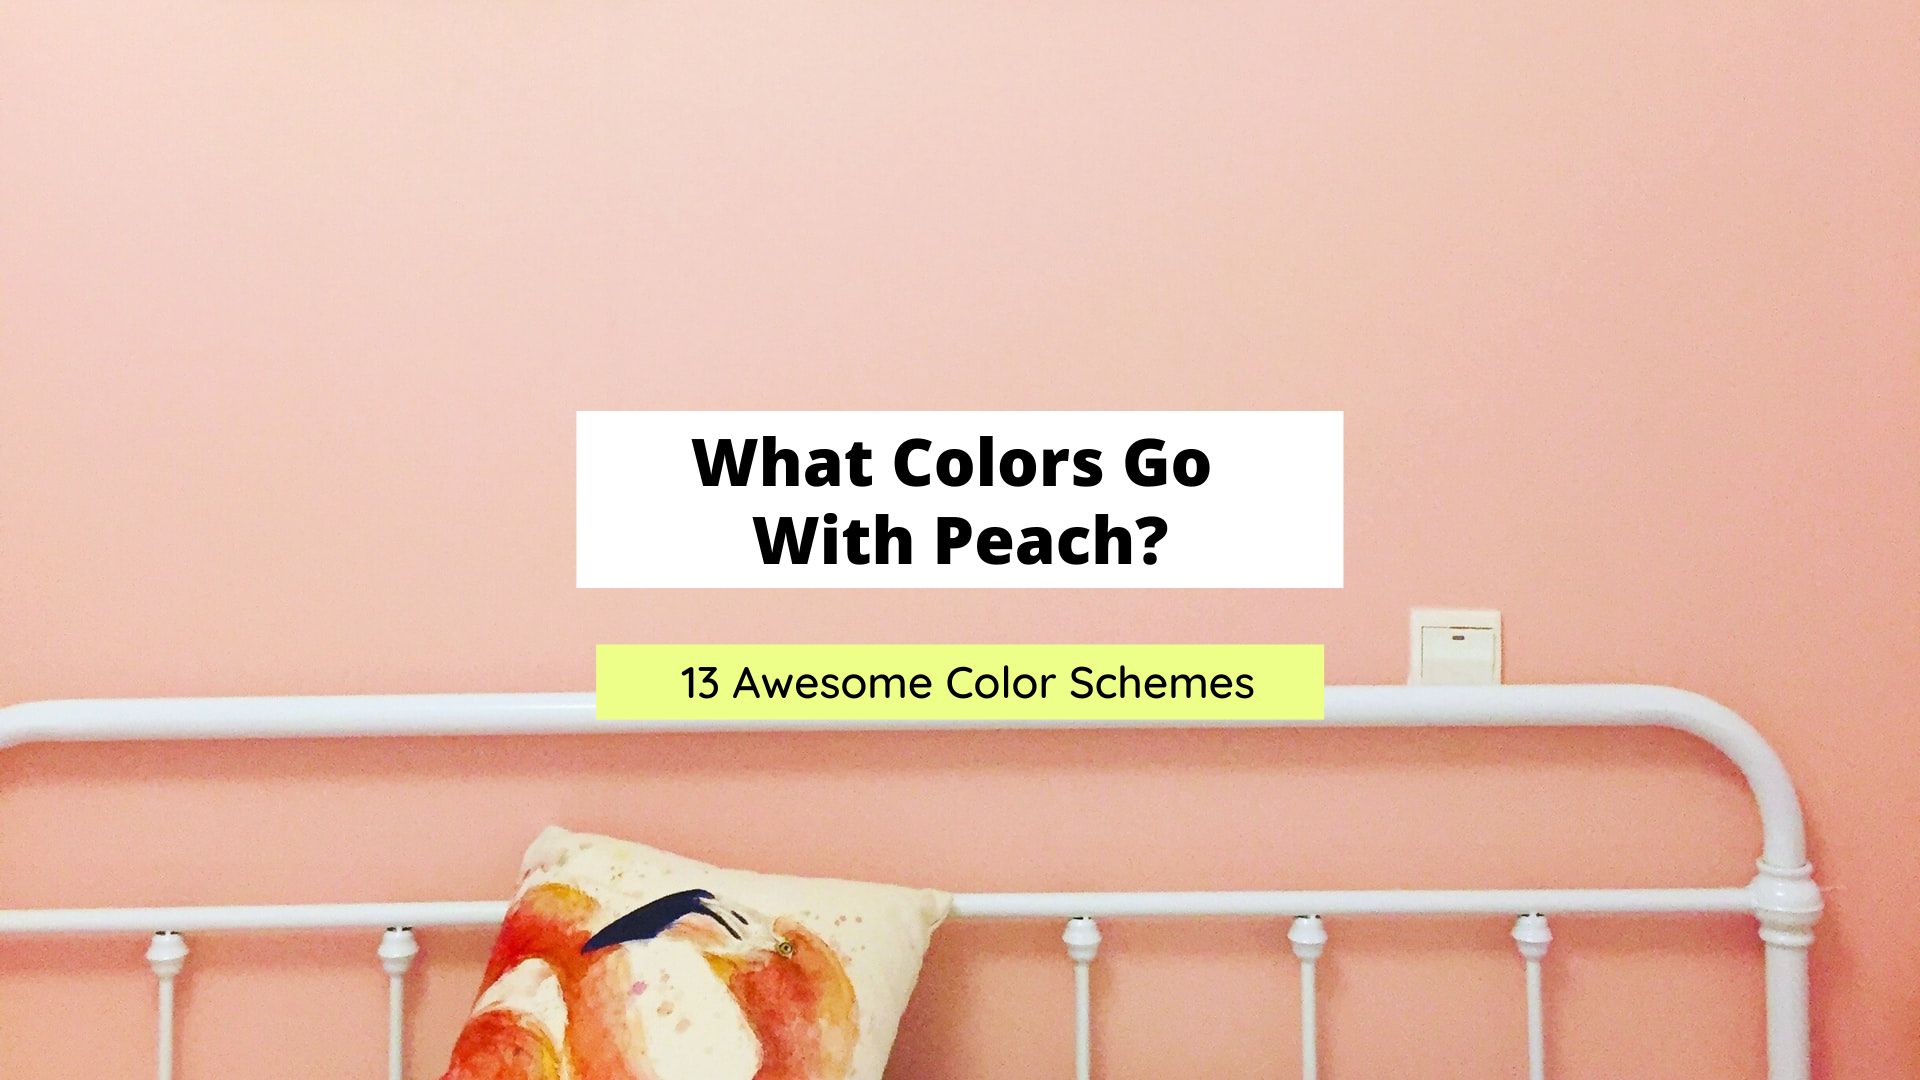 What colors go with peach